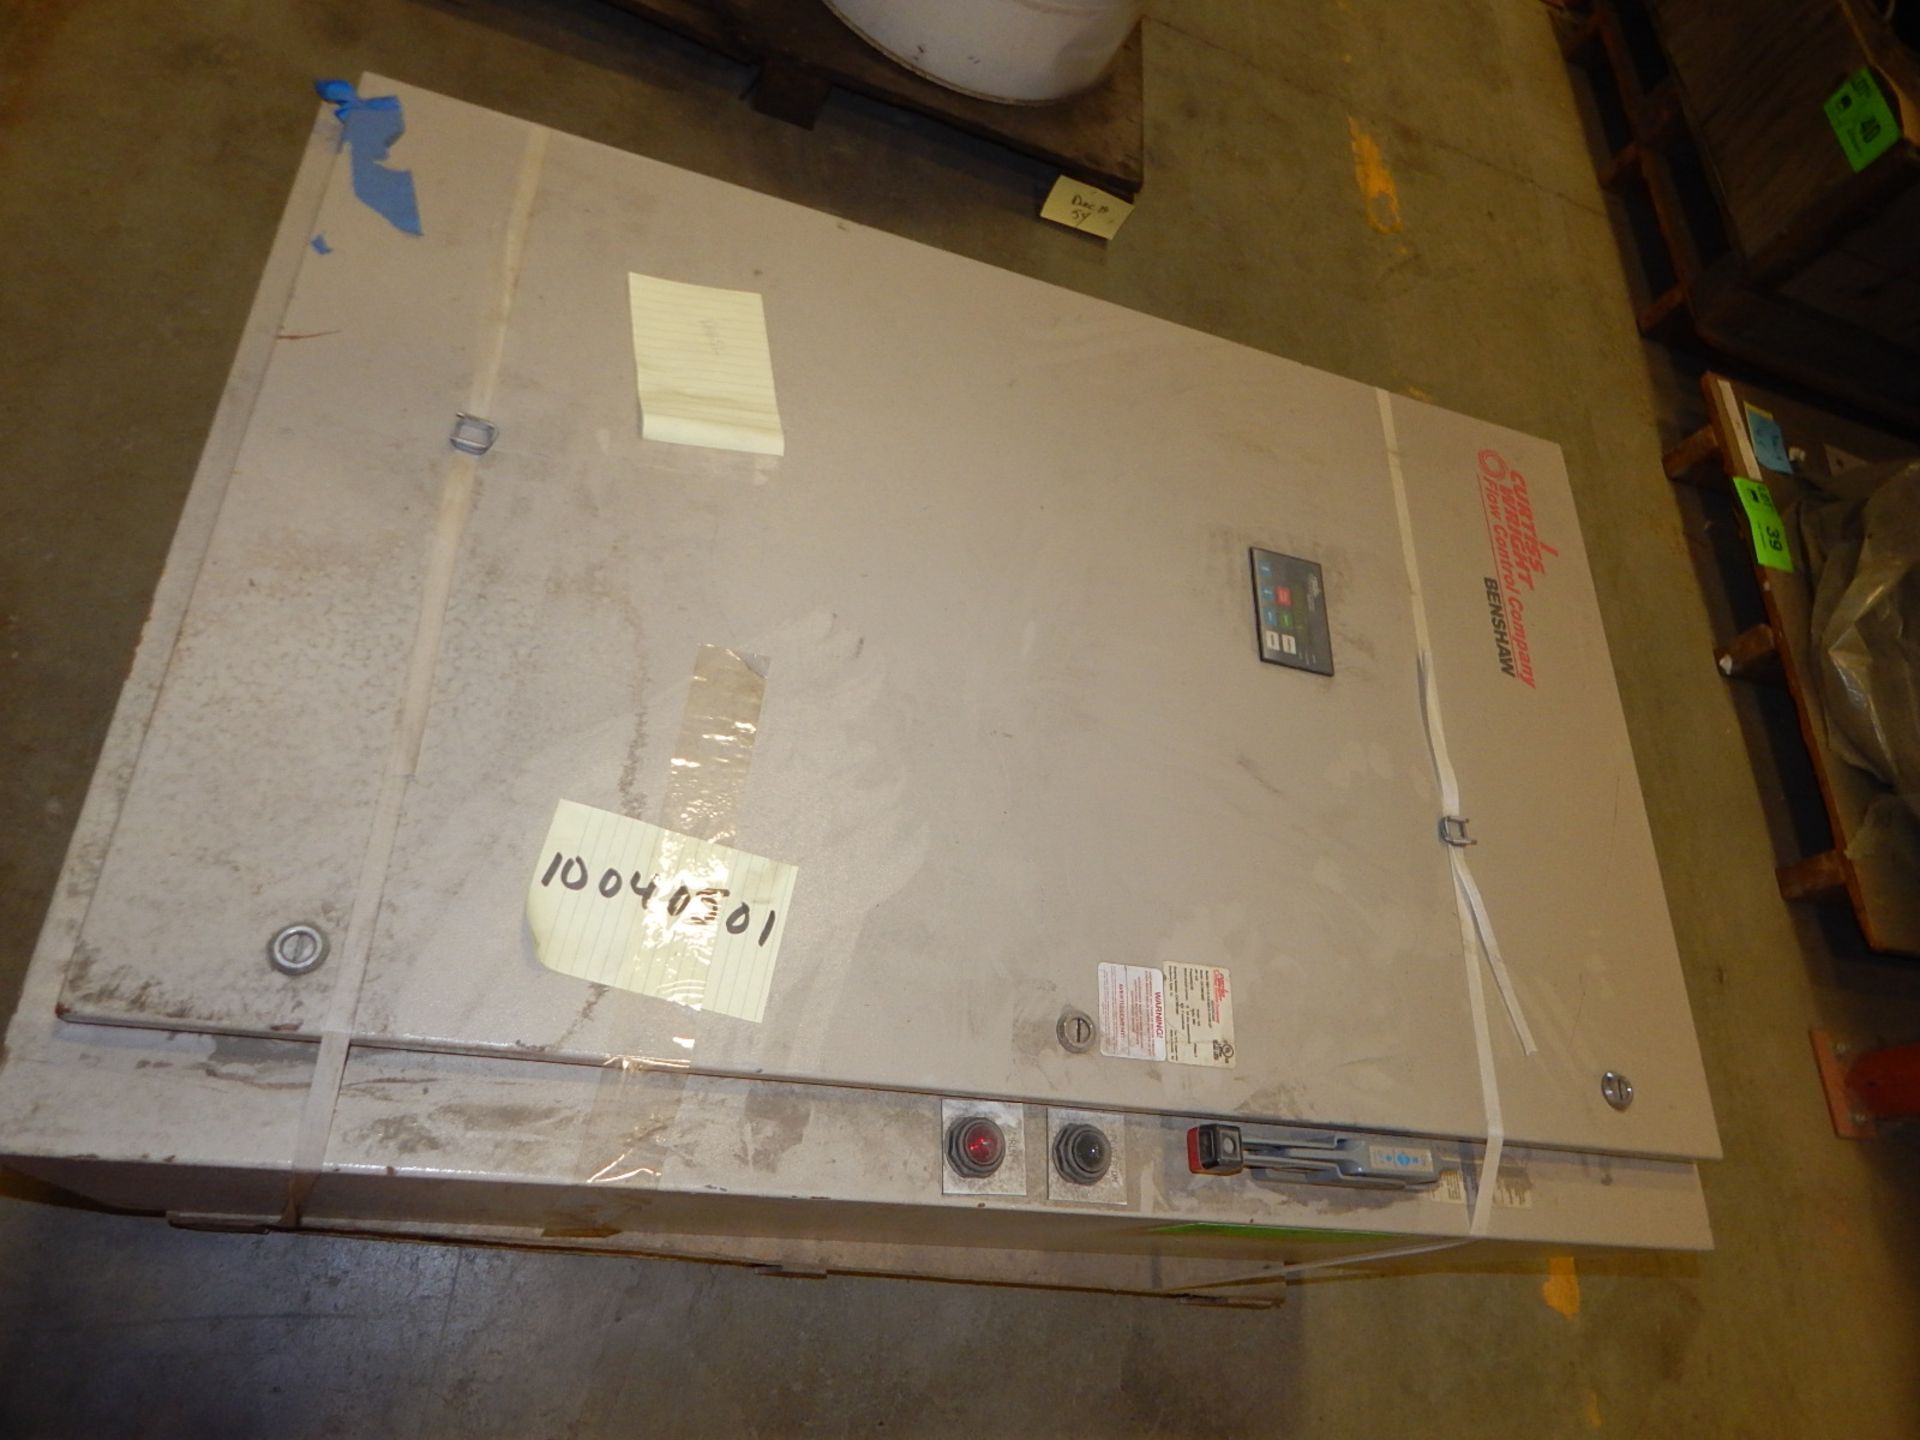 LOT/ CURTISS WRIGHT FLOW CONTROL COMPANY STARTER CABINET (CMD) - Image 2 of 5